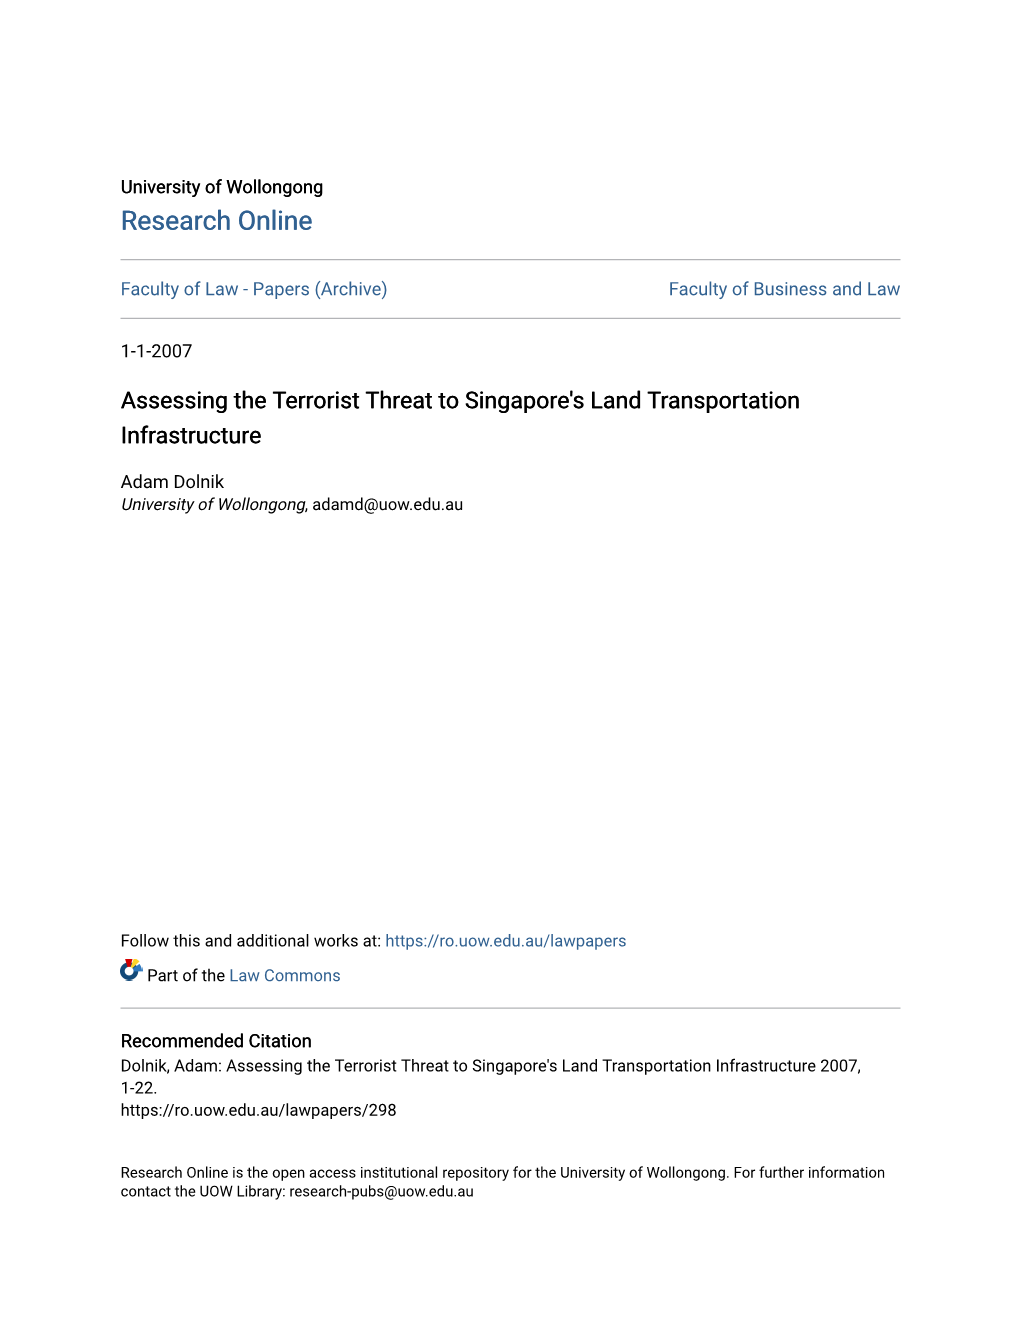 Assessing the Terrorist Threat to Singapore's Land Transportation Infrastructure